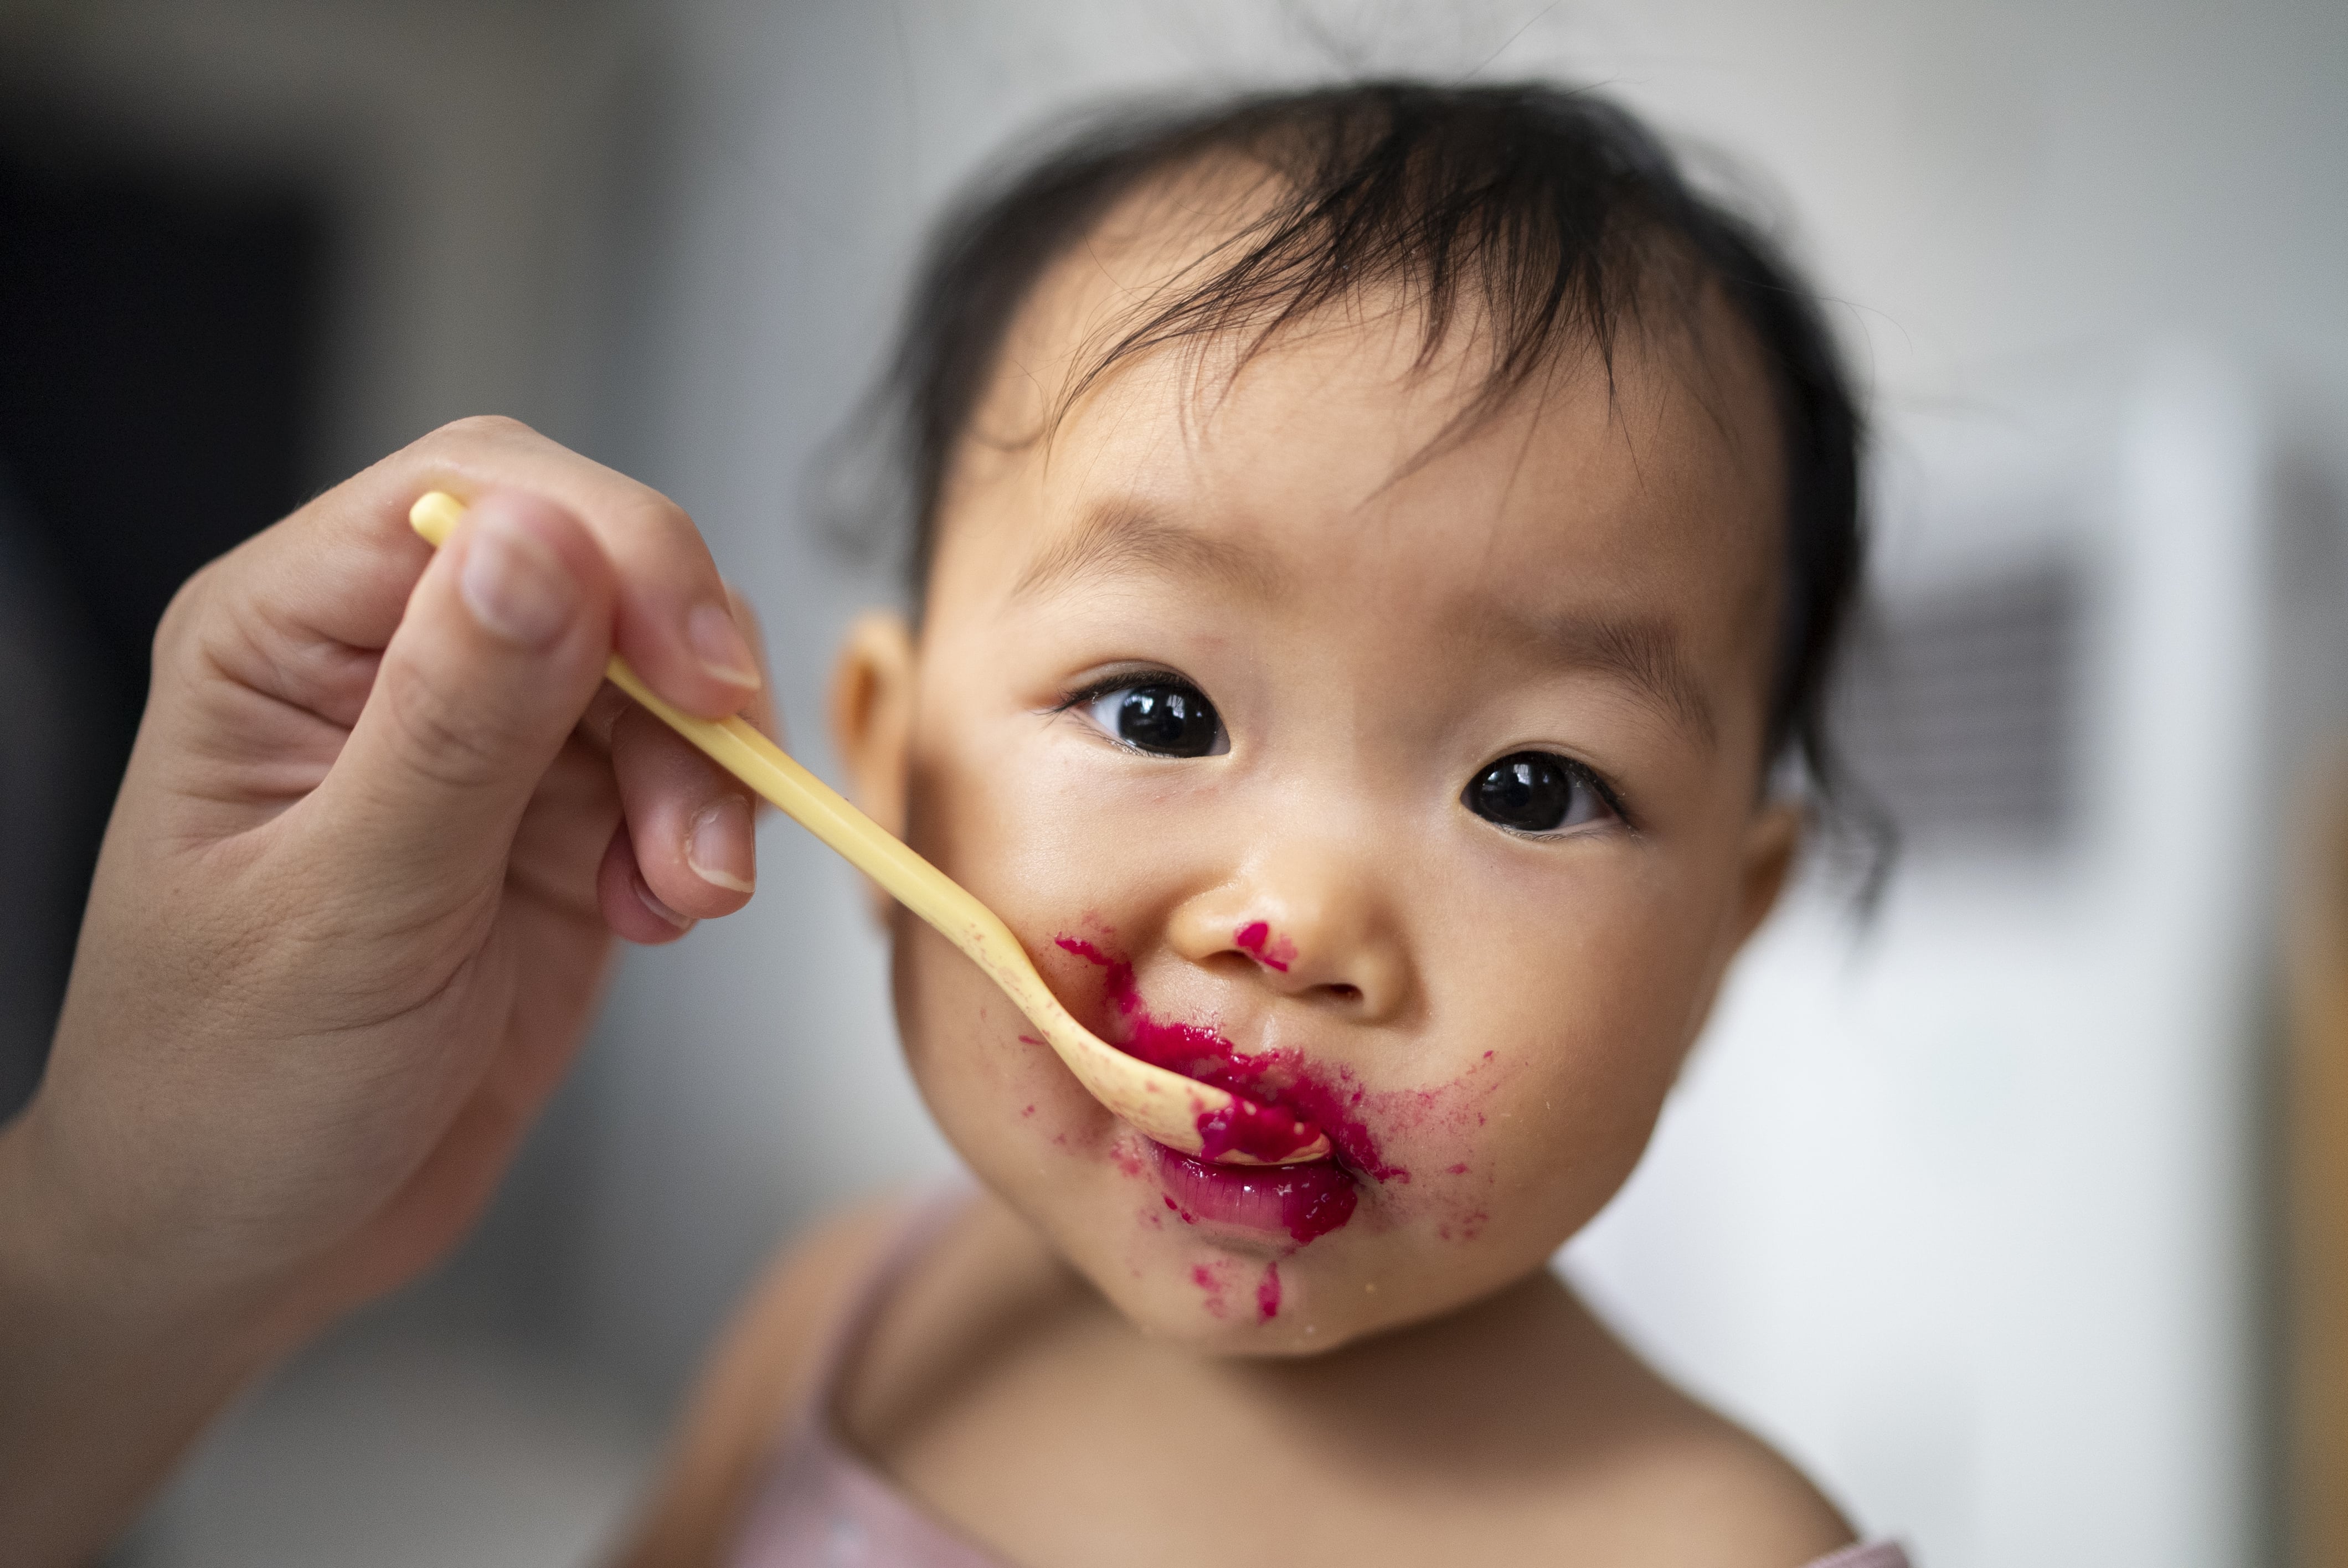 8 Best Baby Food Makers of 2023